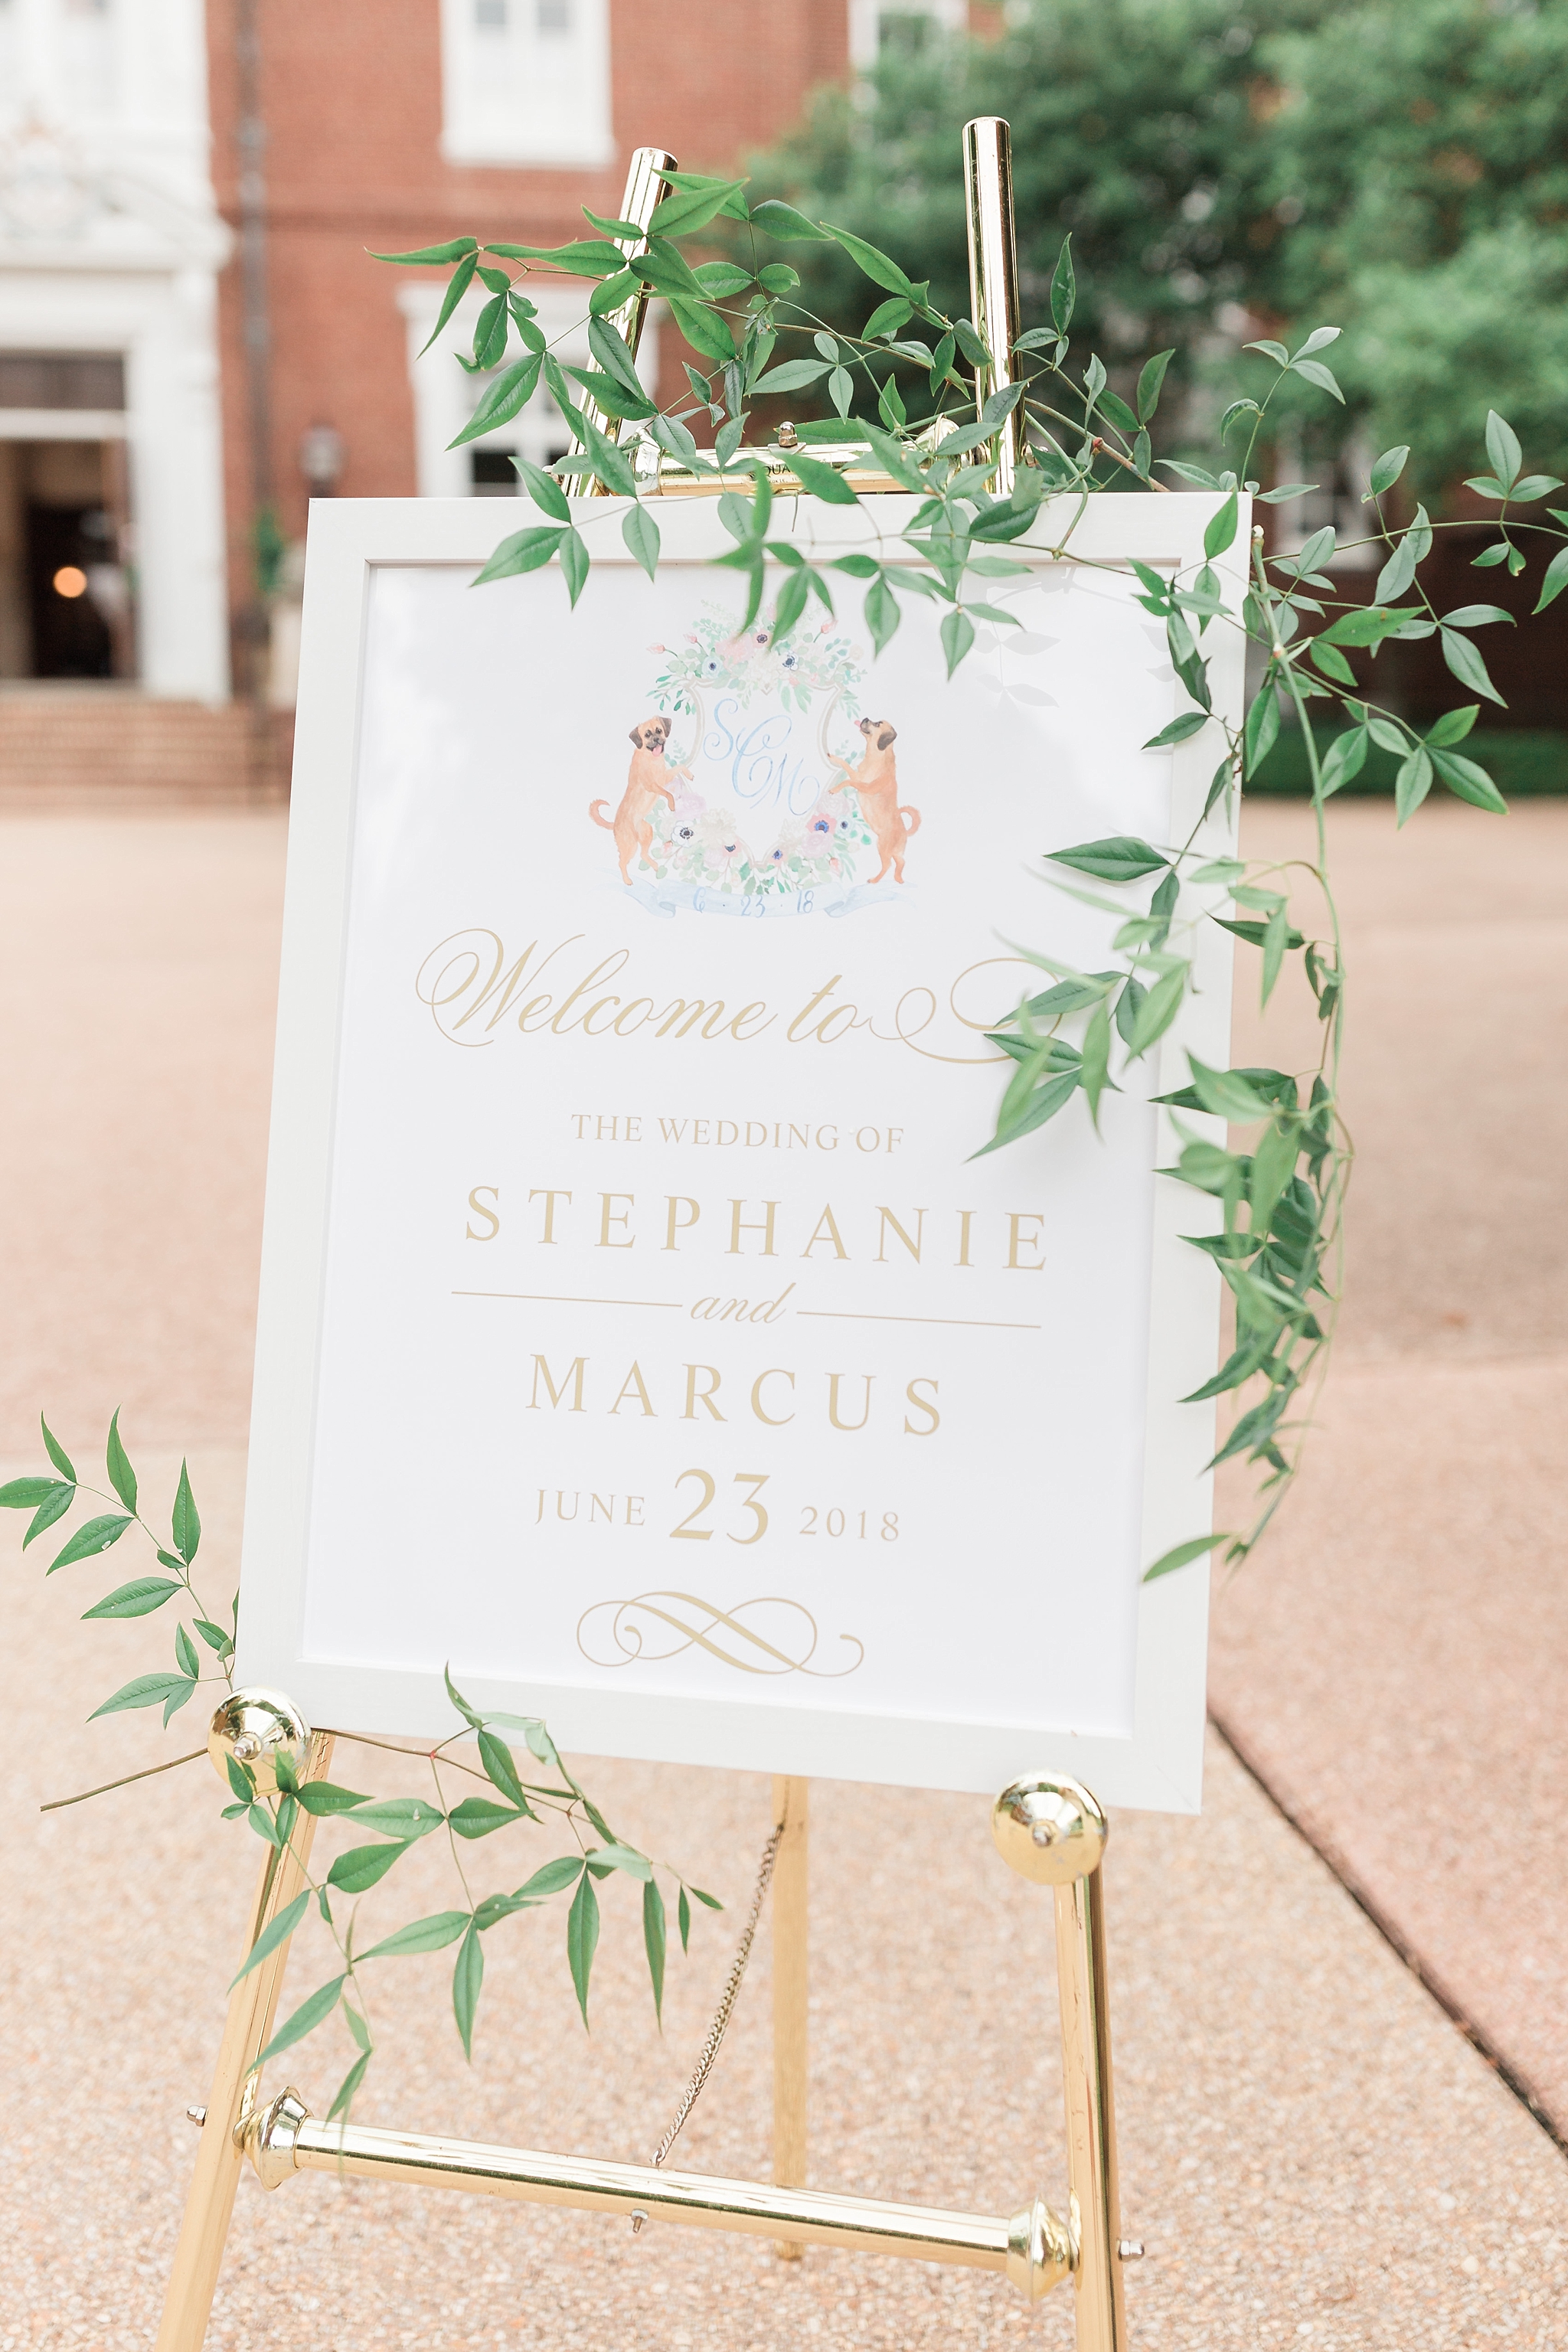 This elegant summer wedding at Oxon Hill Manor was styled by SRS Events and photographed by Alicia Lacey.